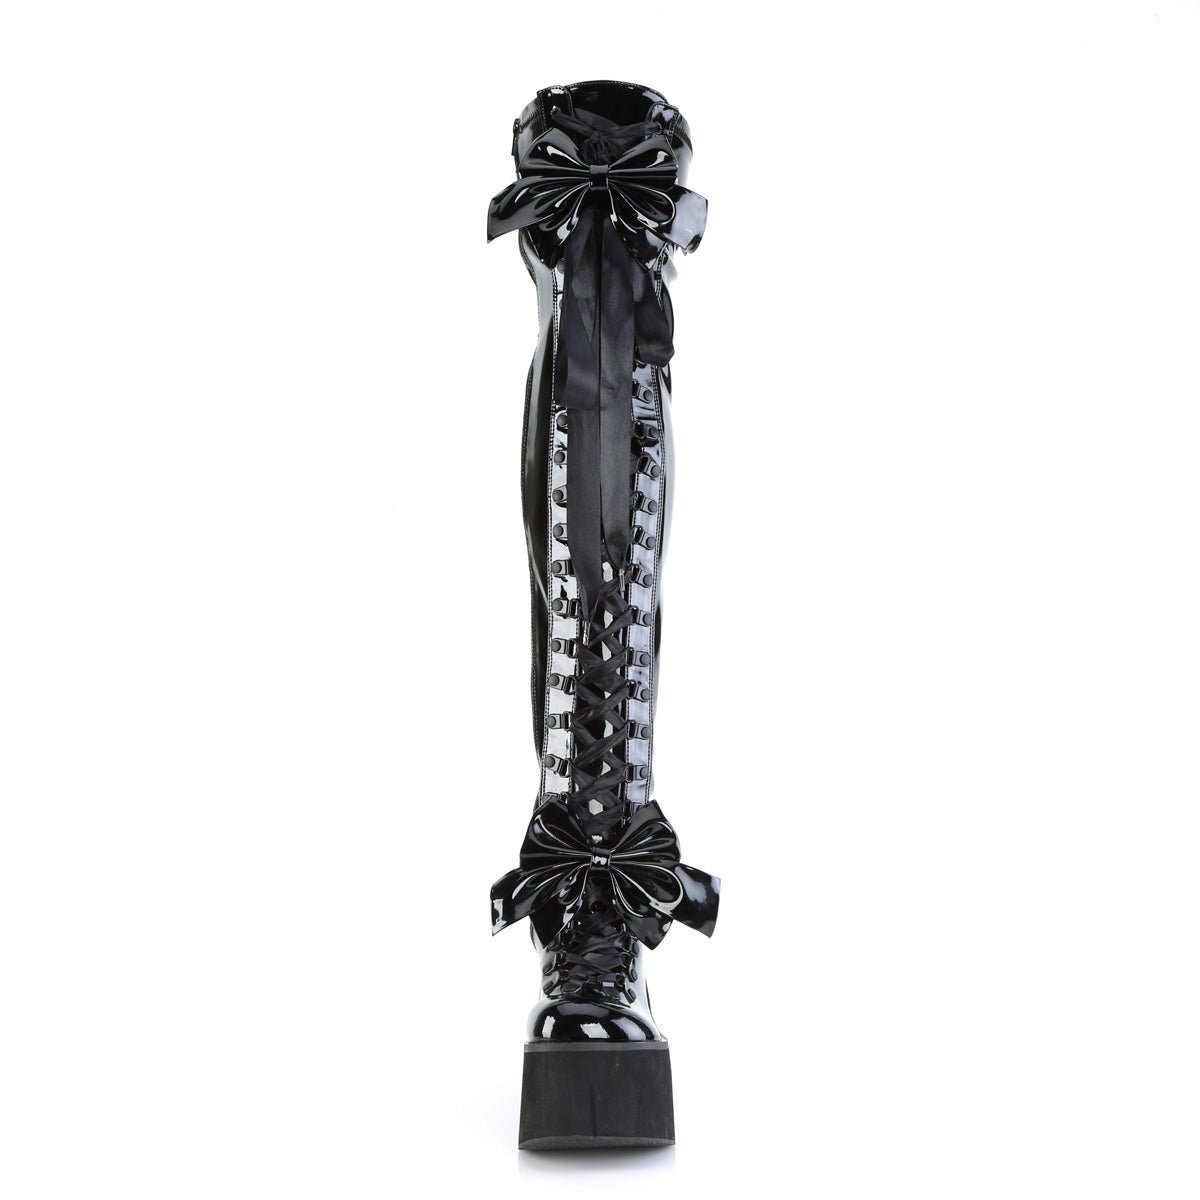 Too Fast | Demonia Kera 303 | Black Stretch Patent Leather Women's Over The Knee Boots